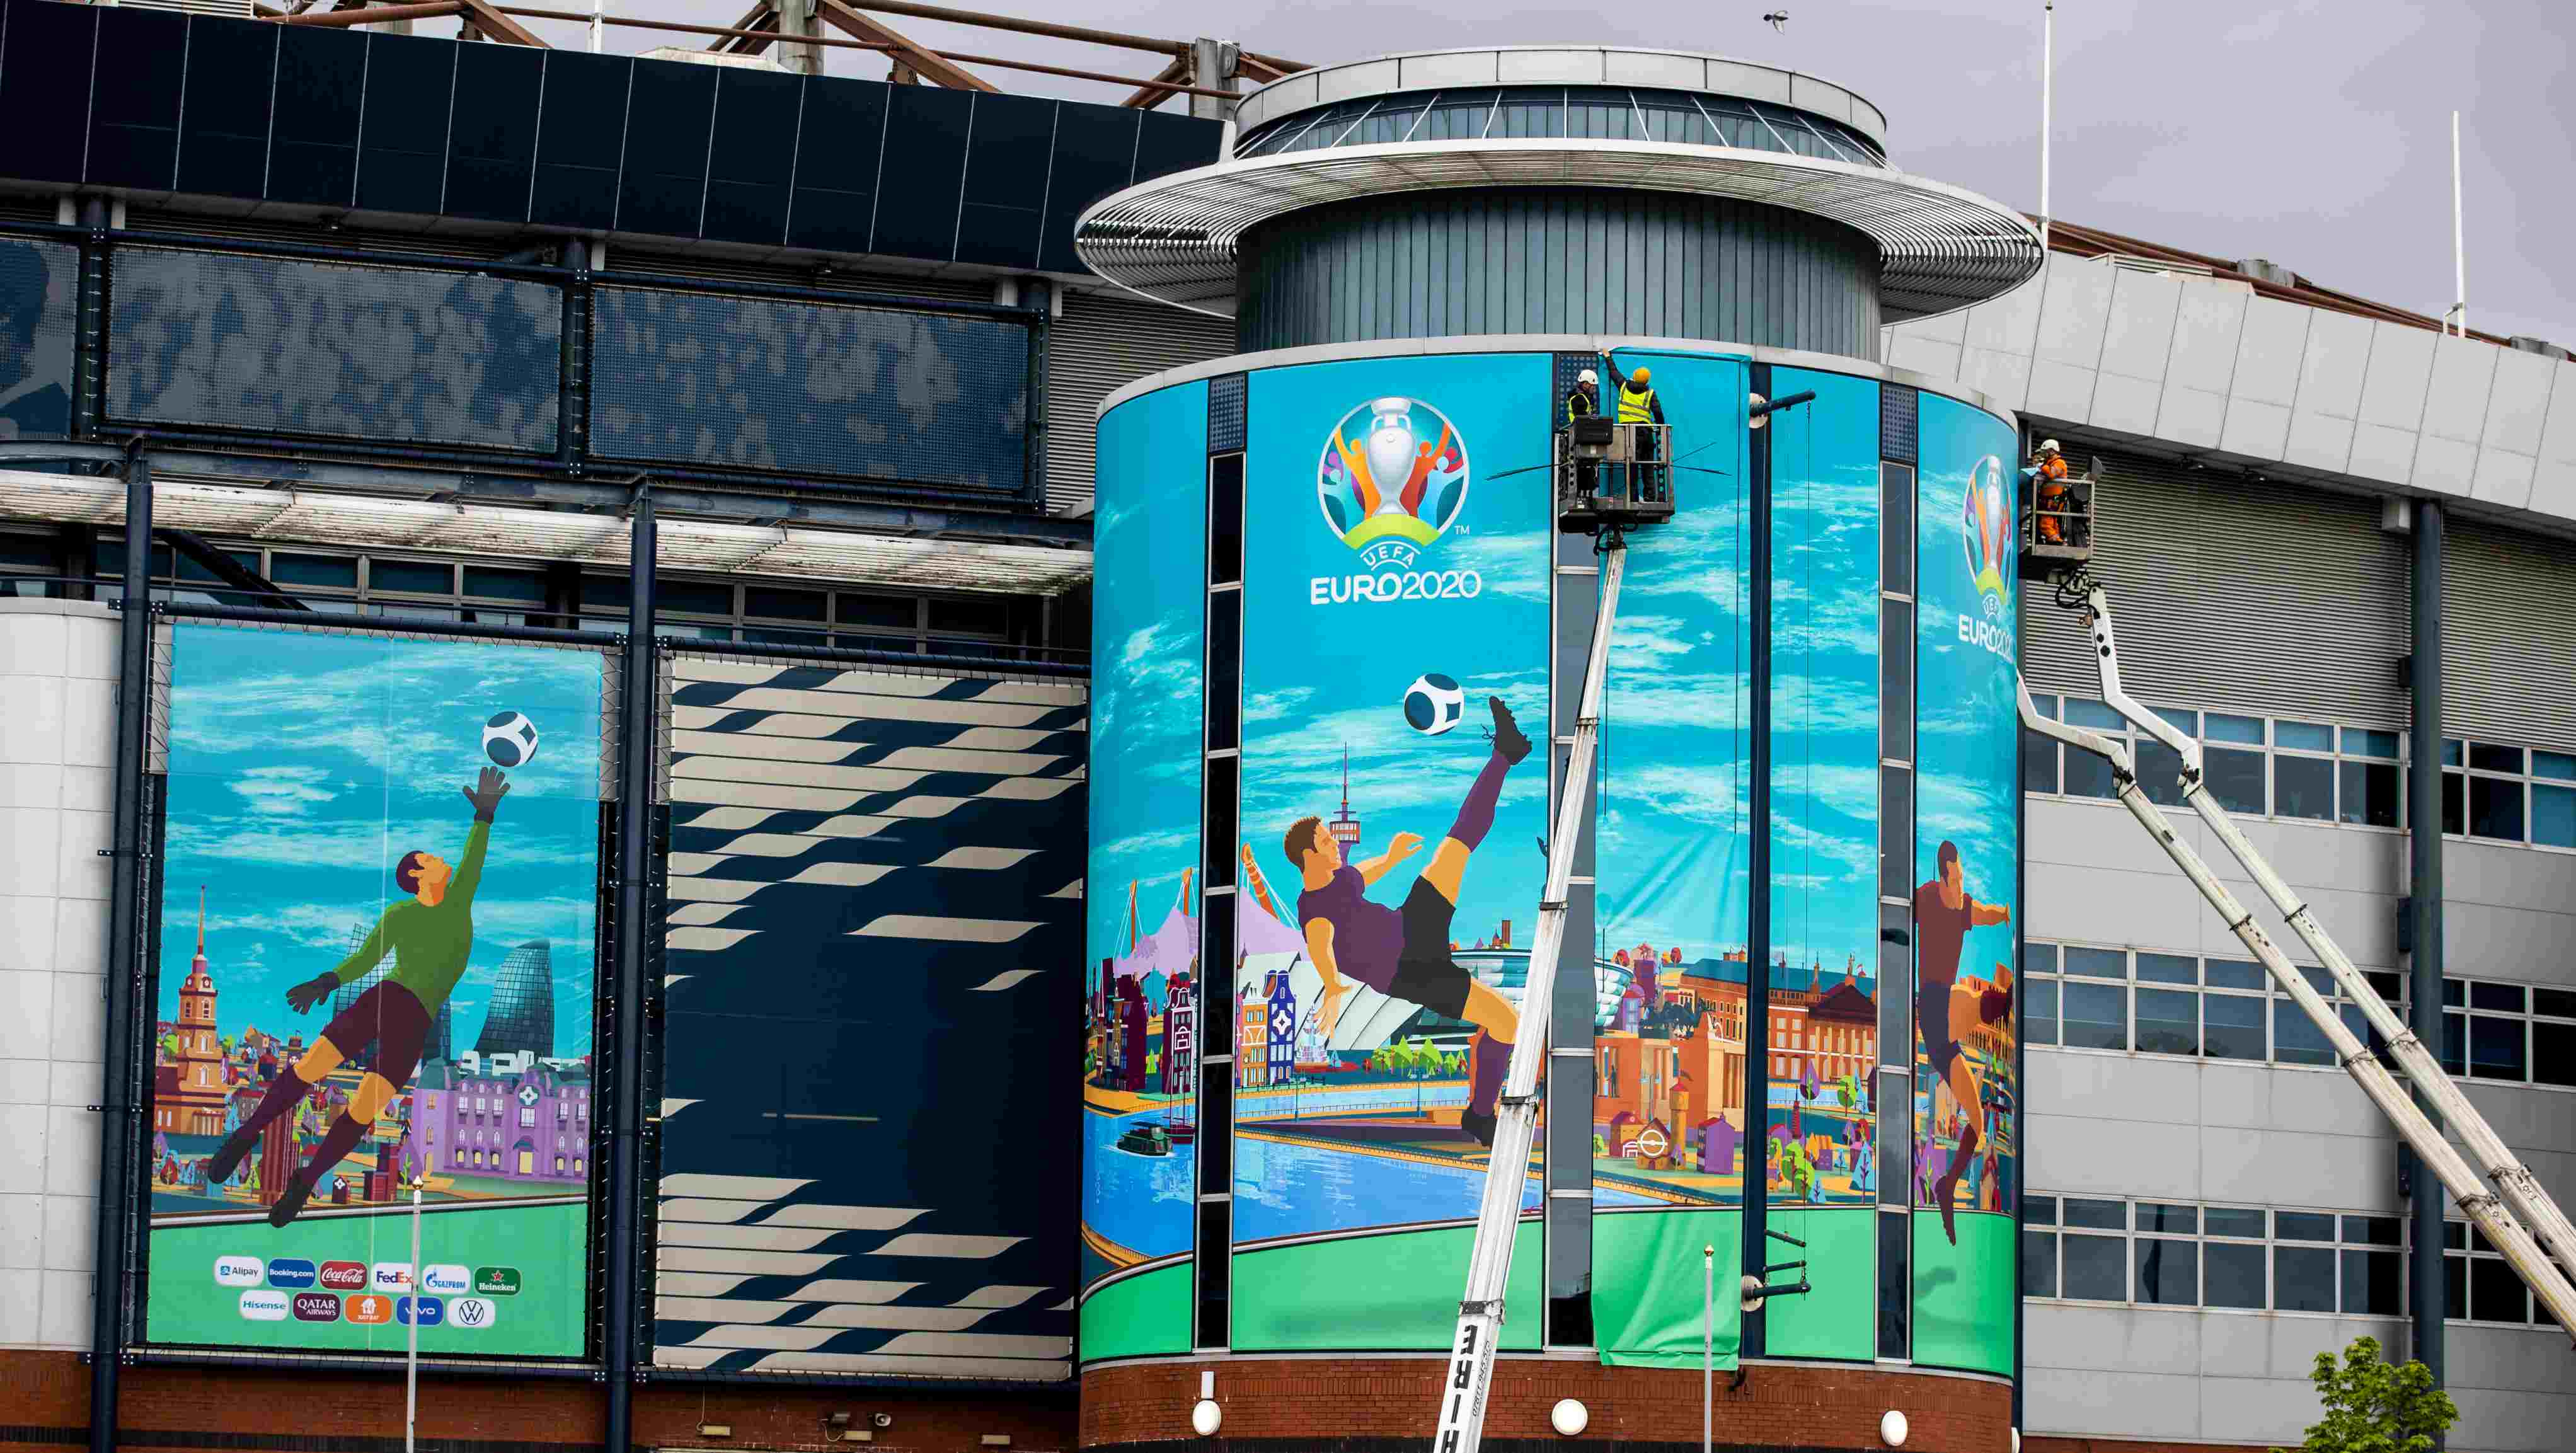 Euro 2020 branding is displayed outside of Hampden Stadium ahead of this summer's European Championships in Glasgow on May 26, 2021, in Glasgow, Scotland. (Photo by Craig Williamson / SNS Group)